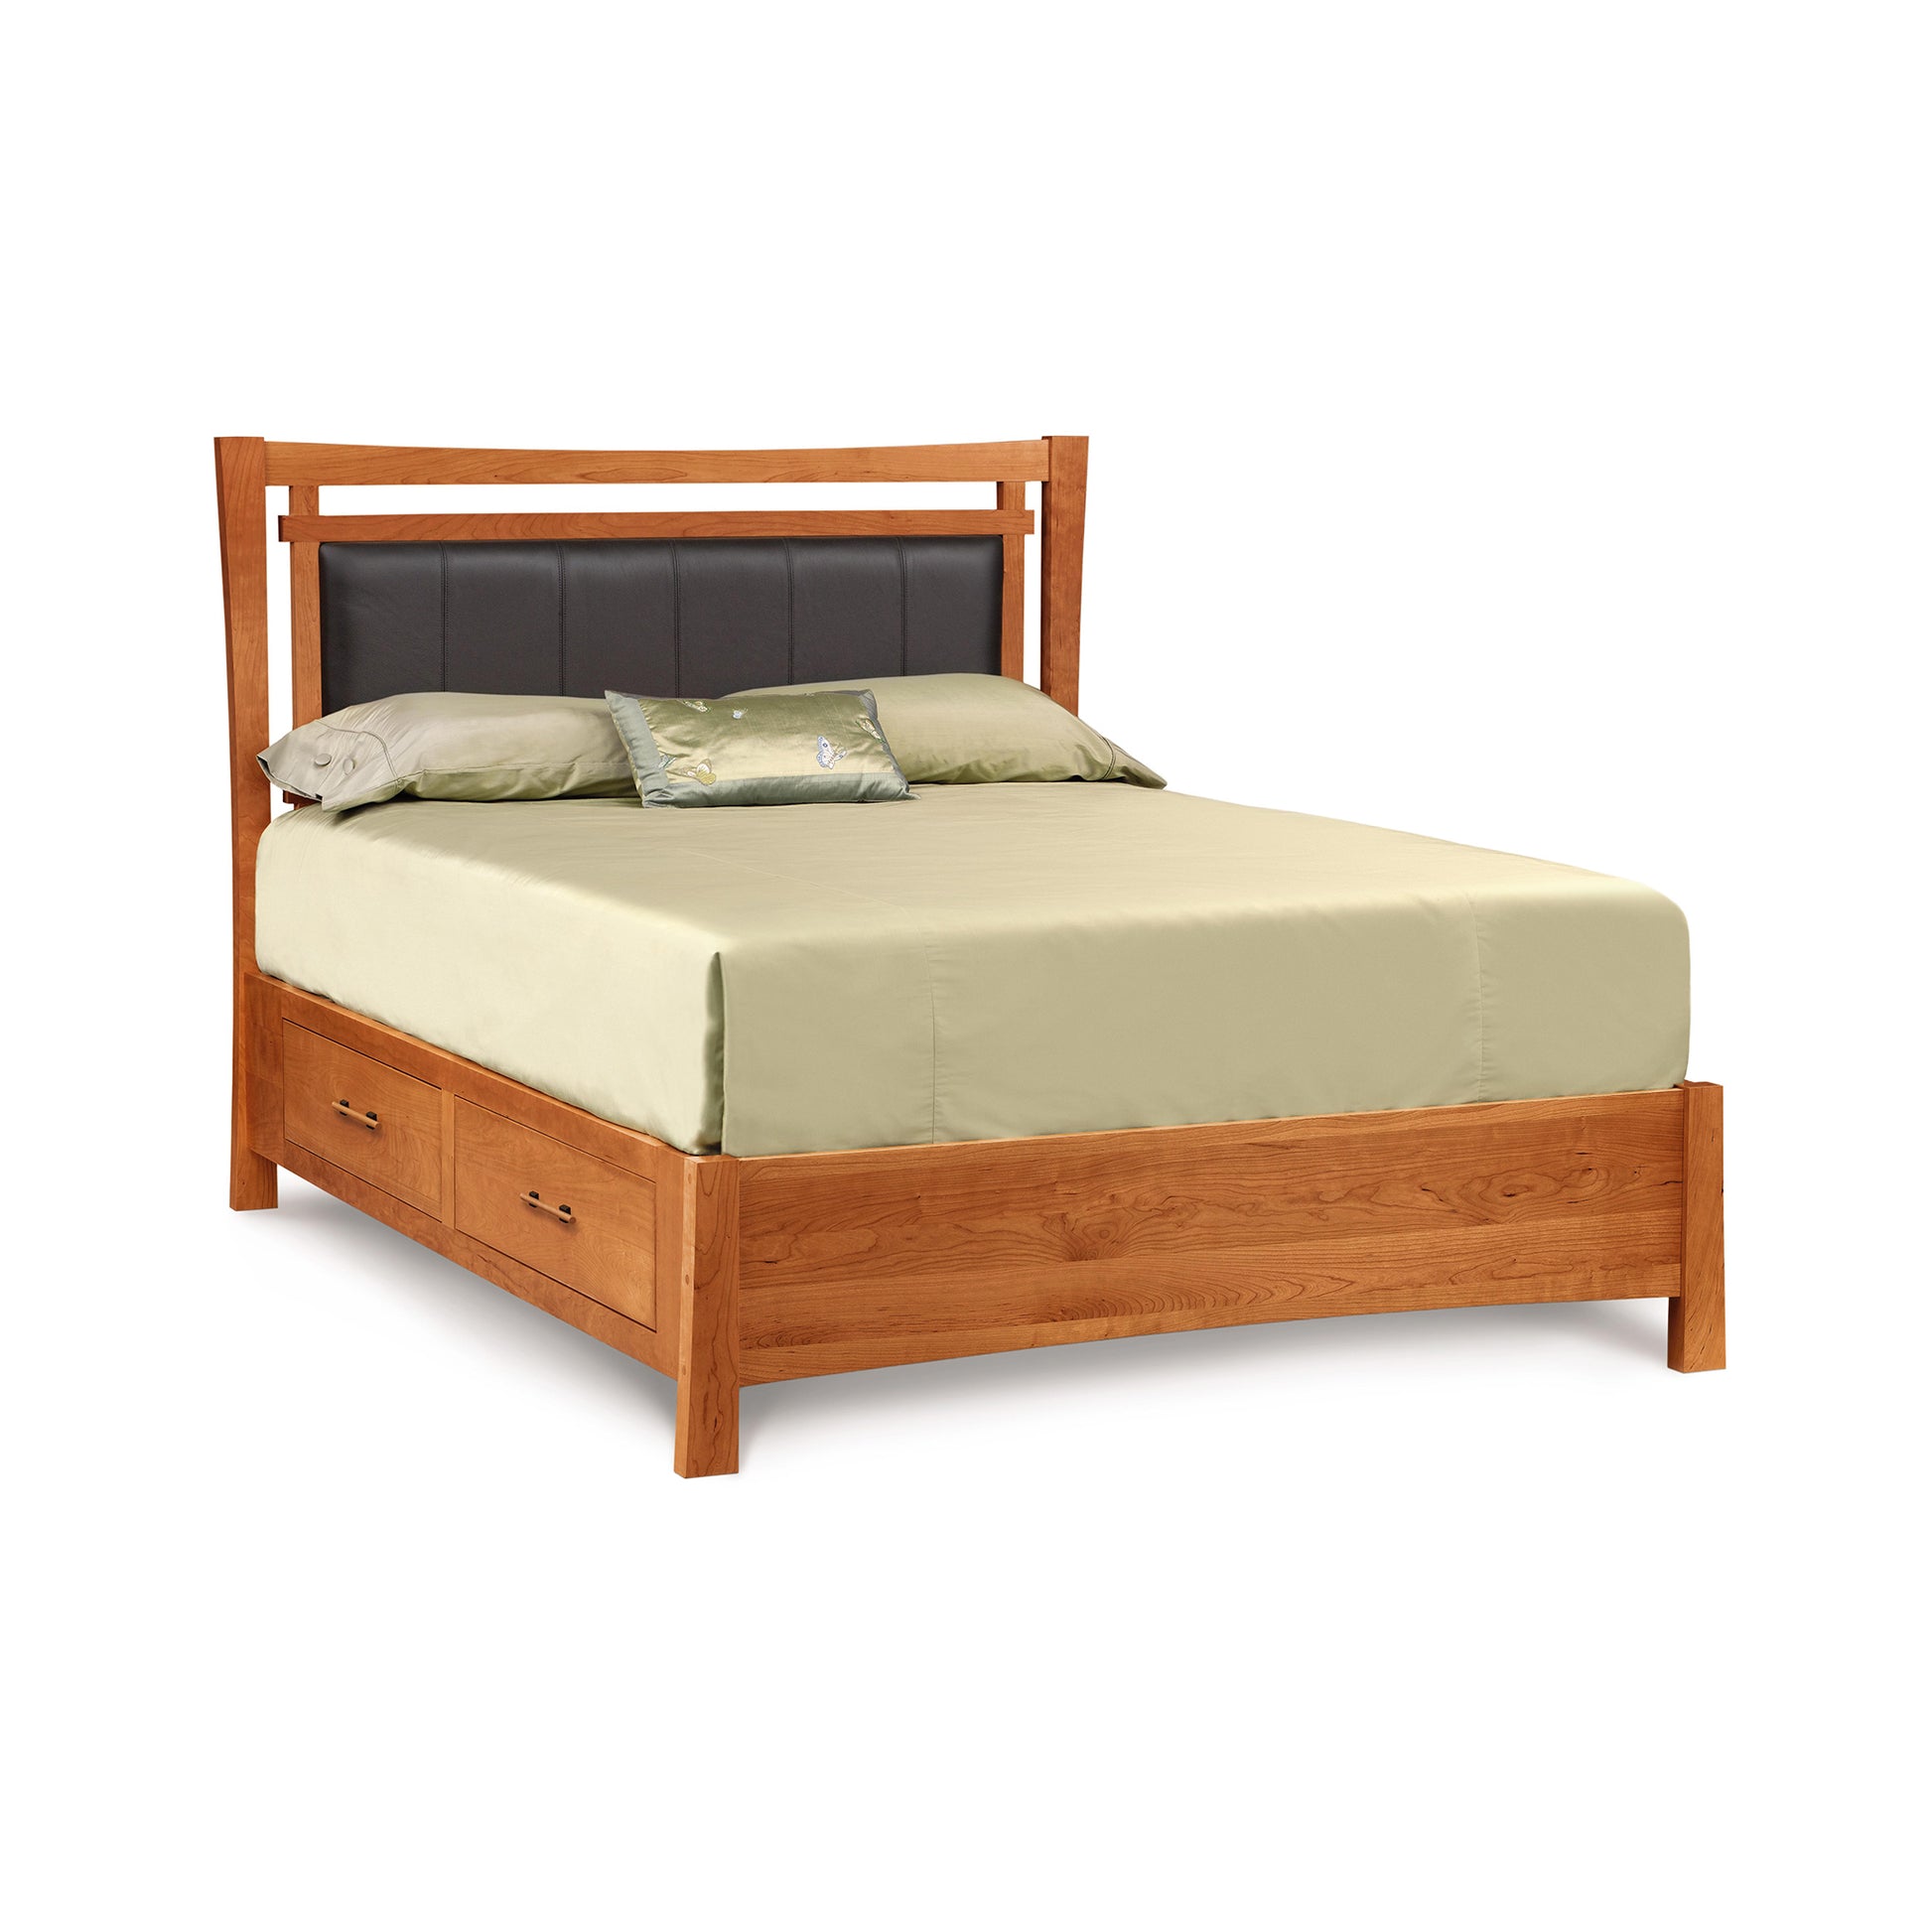 A solid cherry wood Copeland Furniture Monterey Storage Bed with Upholstered Headboard, fitted with a light green sheet and adorned with a decorative pillow.